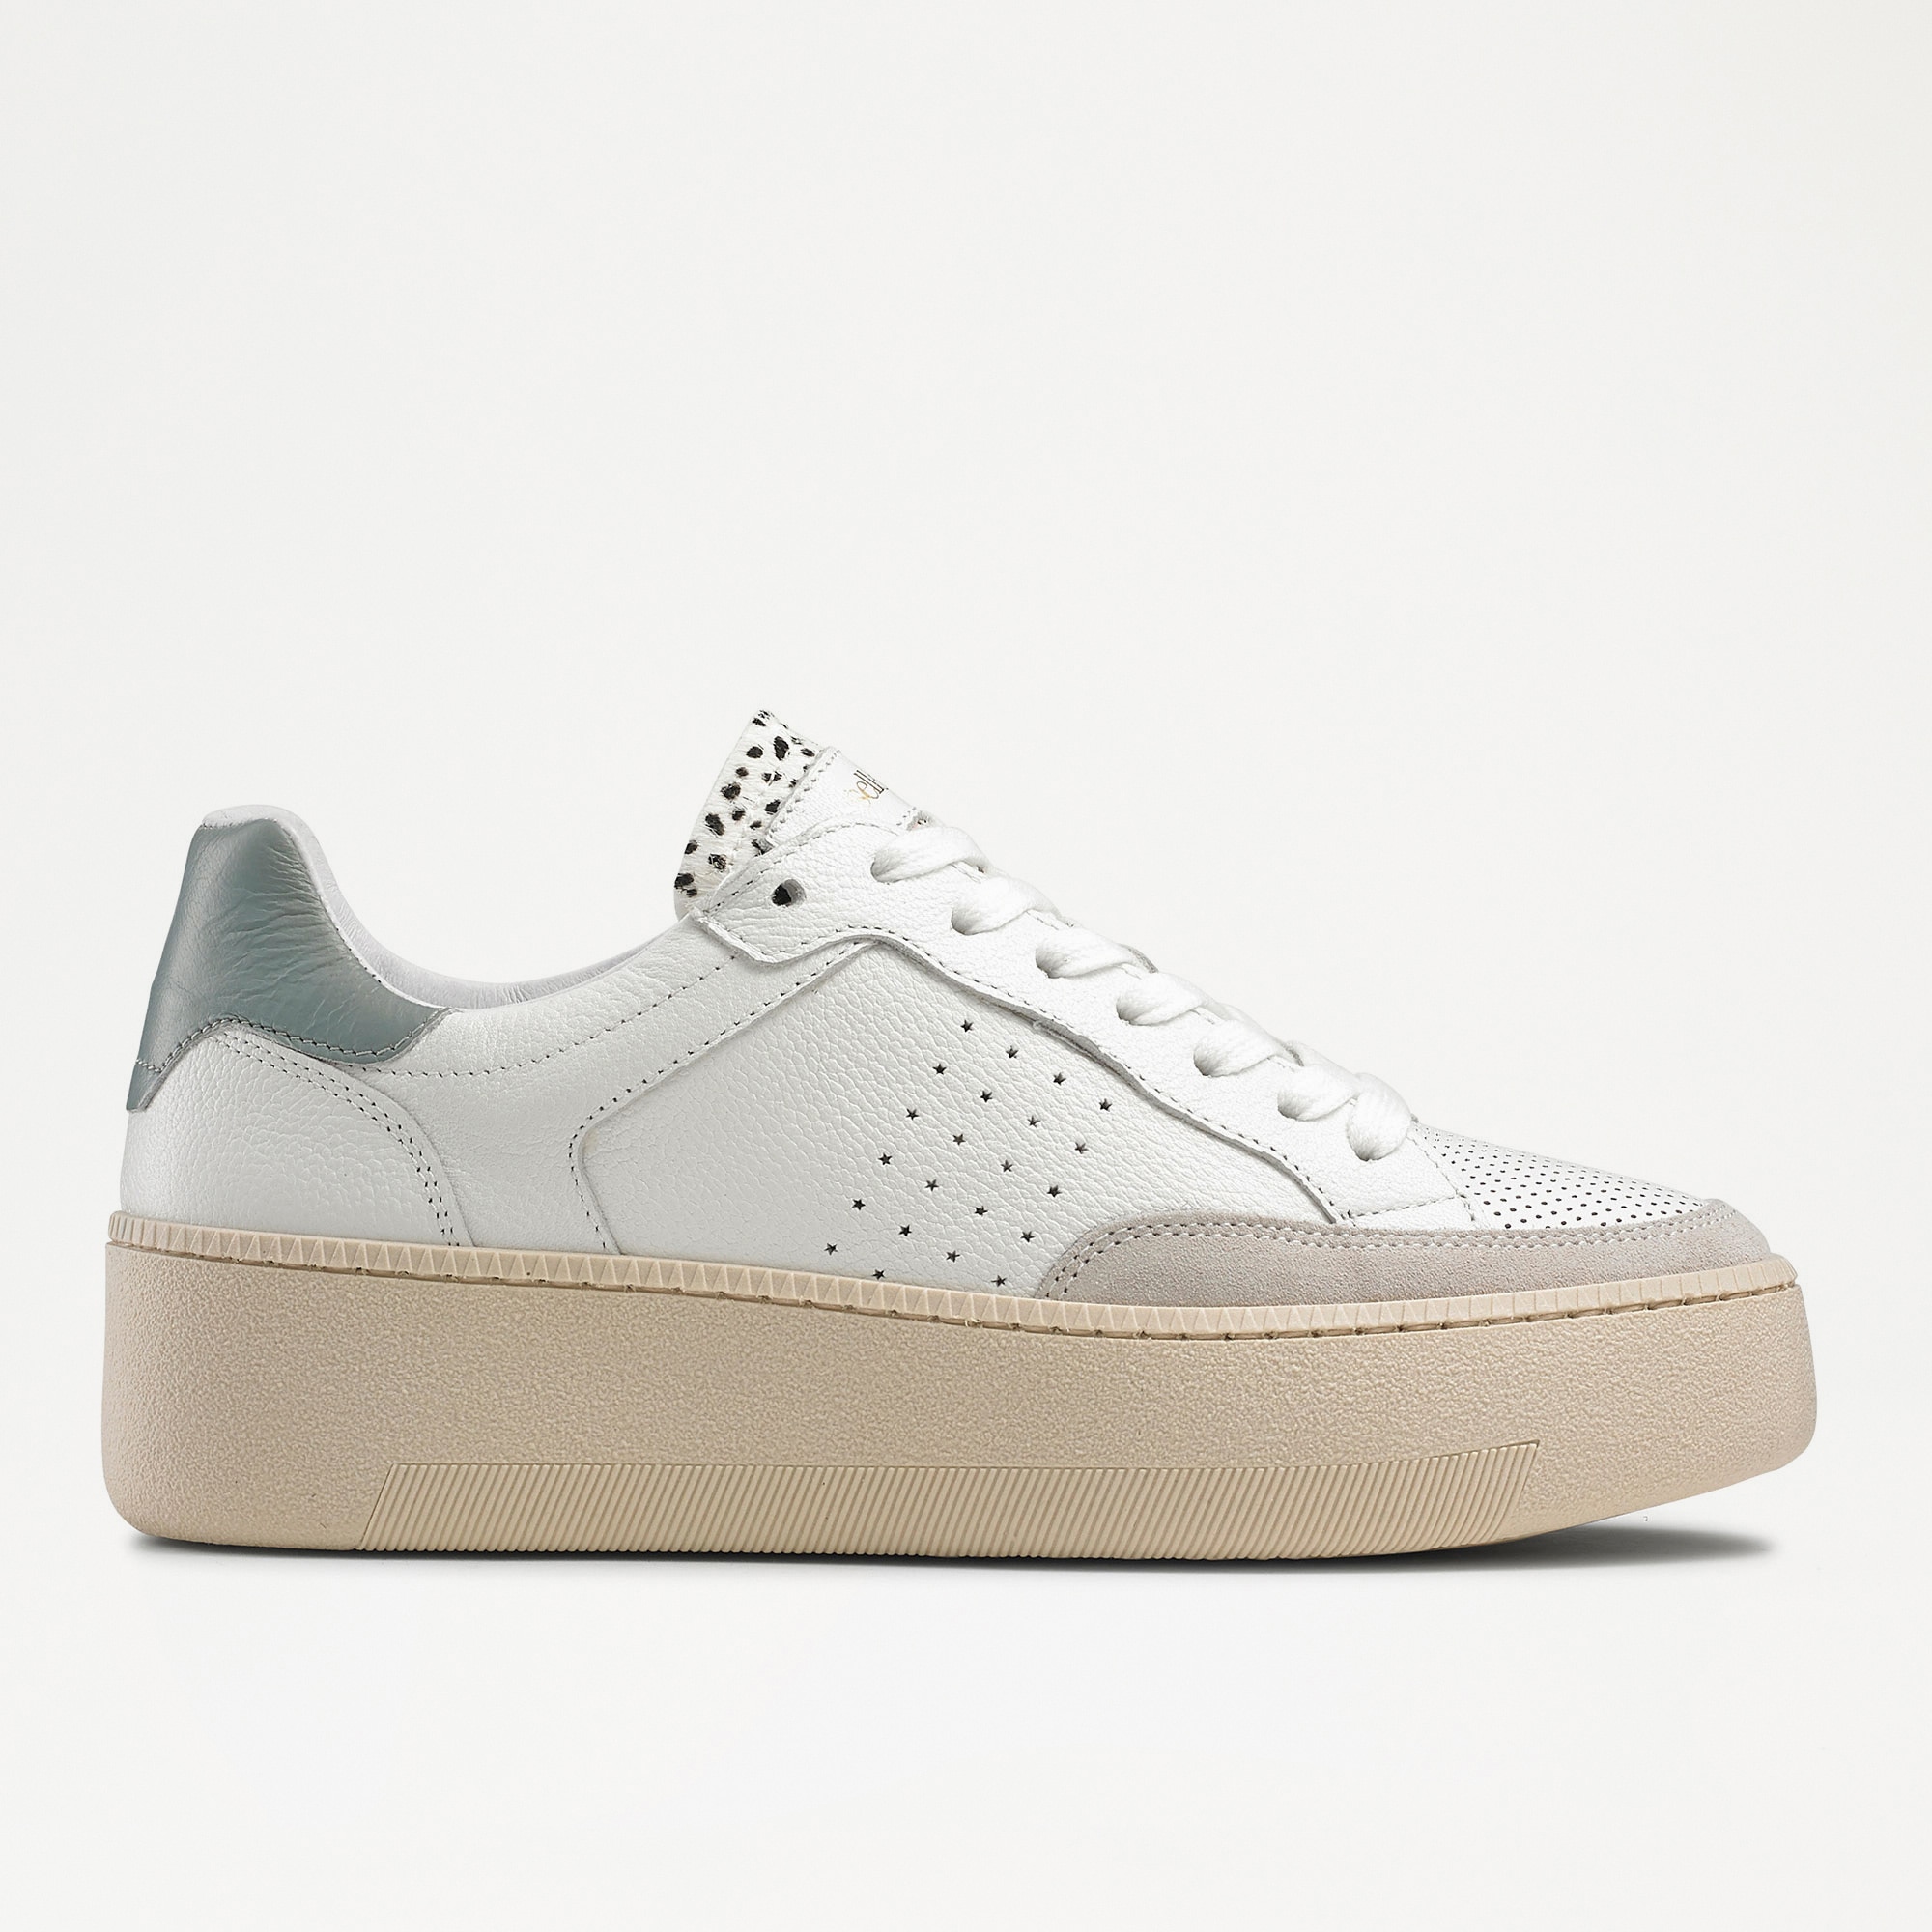 WHISPER Low Top Sneaker in White Leather | Russell & Bromley